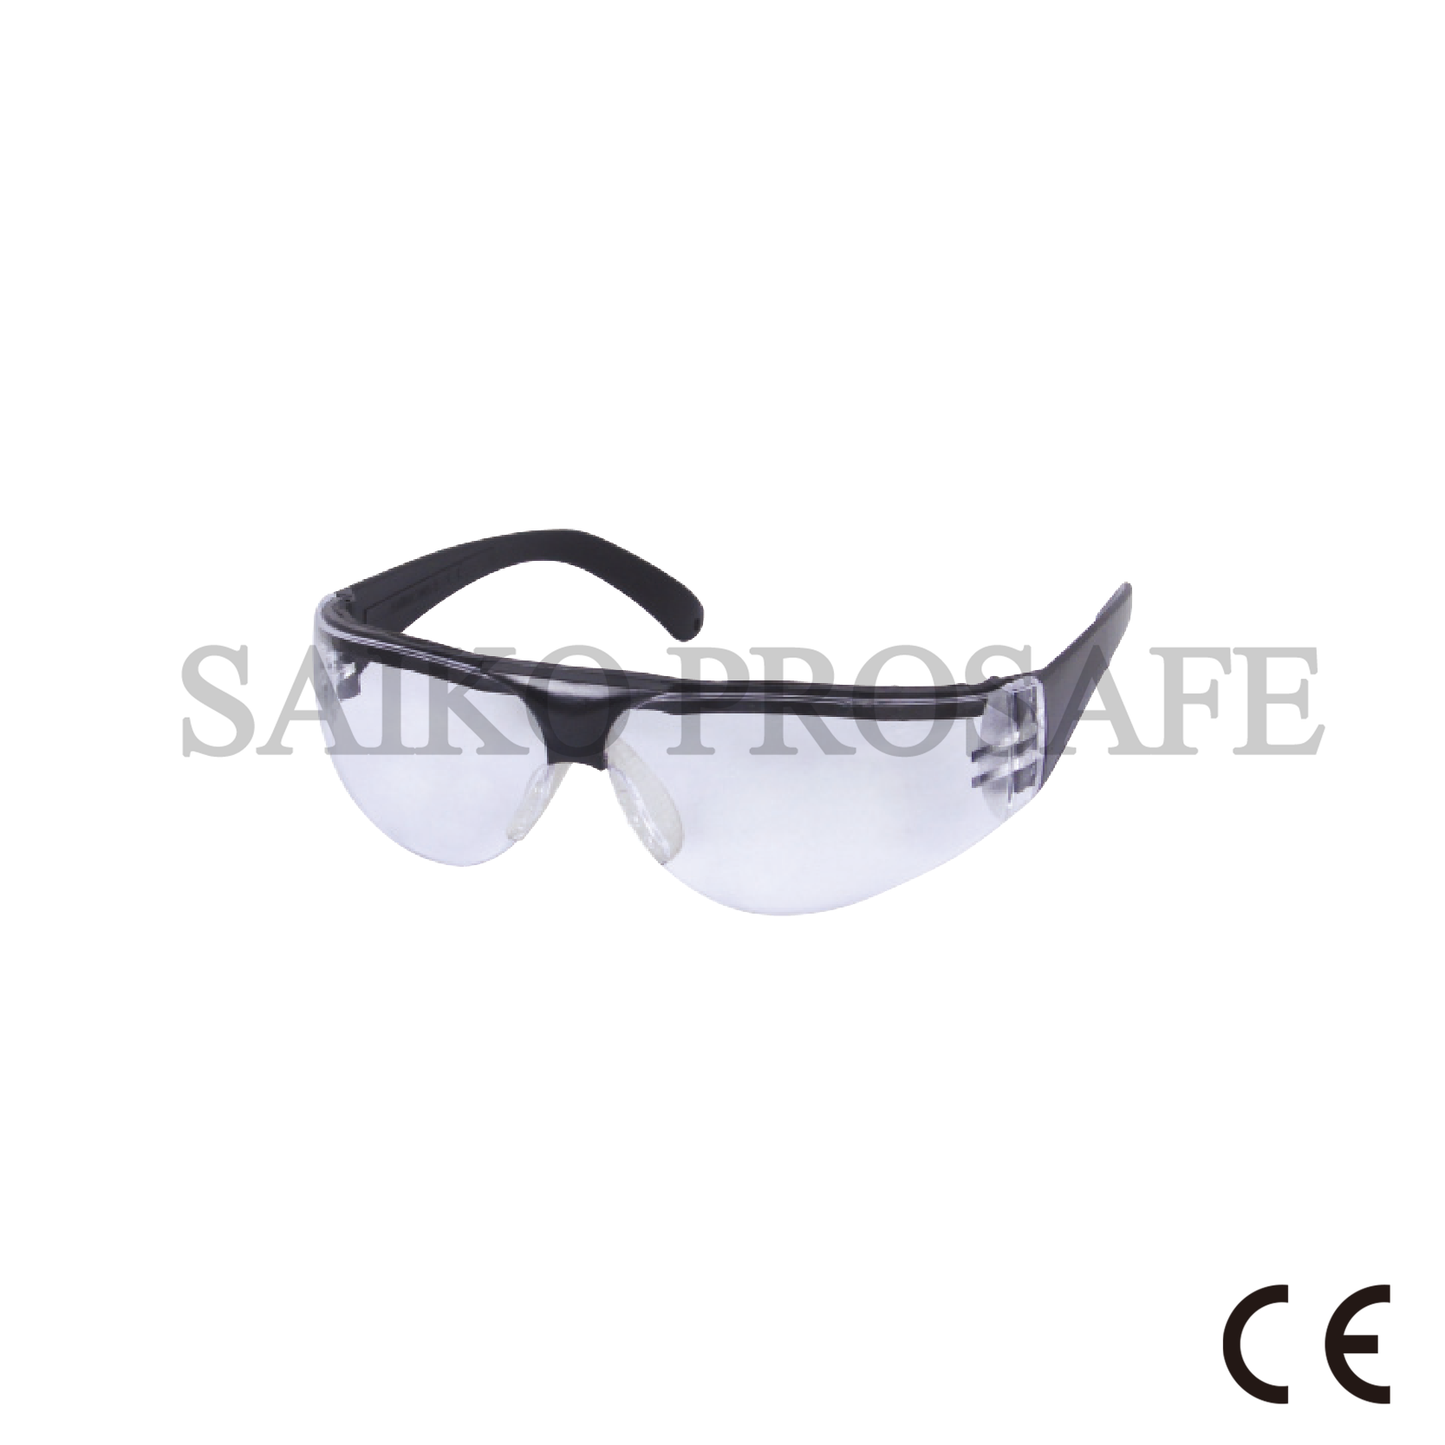 Safety spectacles safety glasses KM1502011